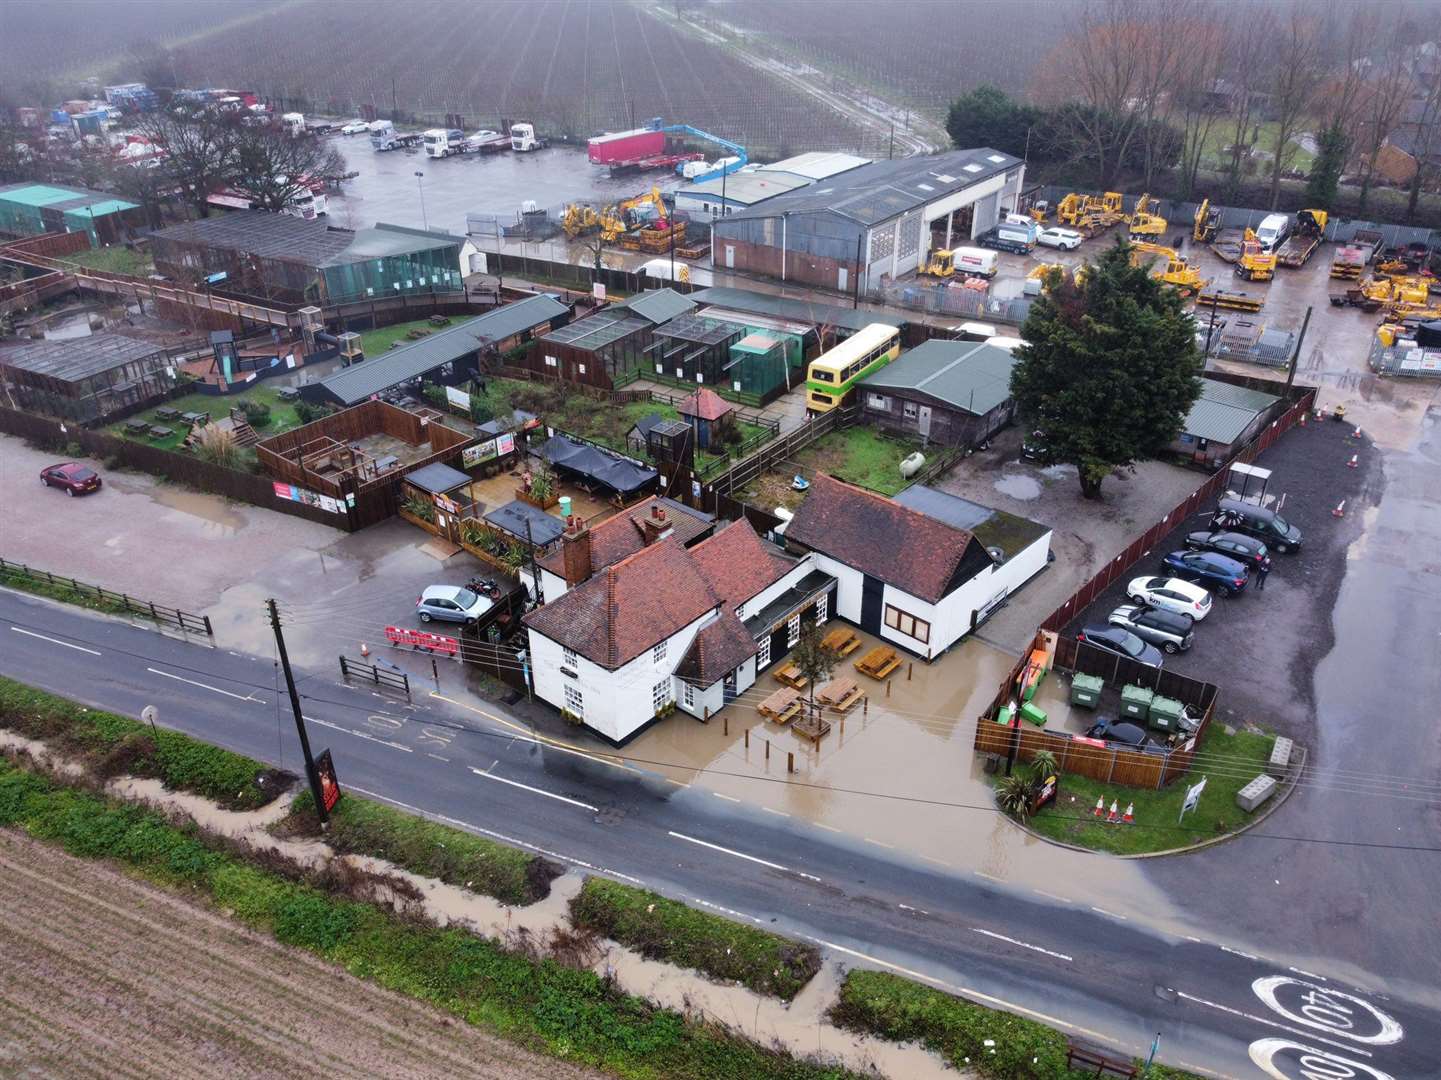 The conservation project, behind the pub, has not been badly damaged. Picture: Geoff Watkins / @DronePilotGeoff